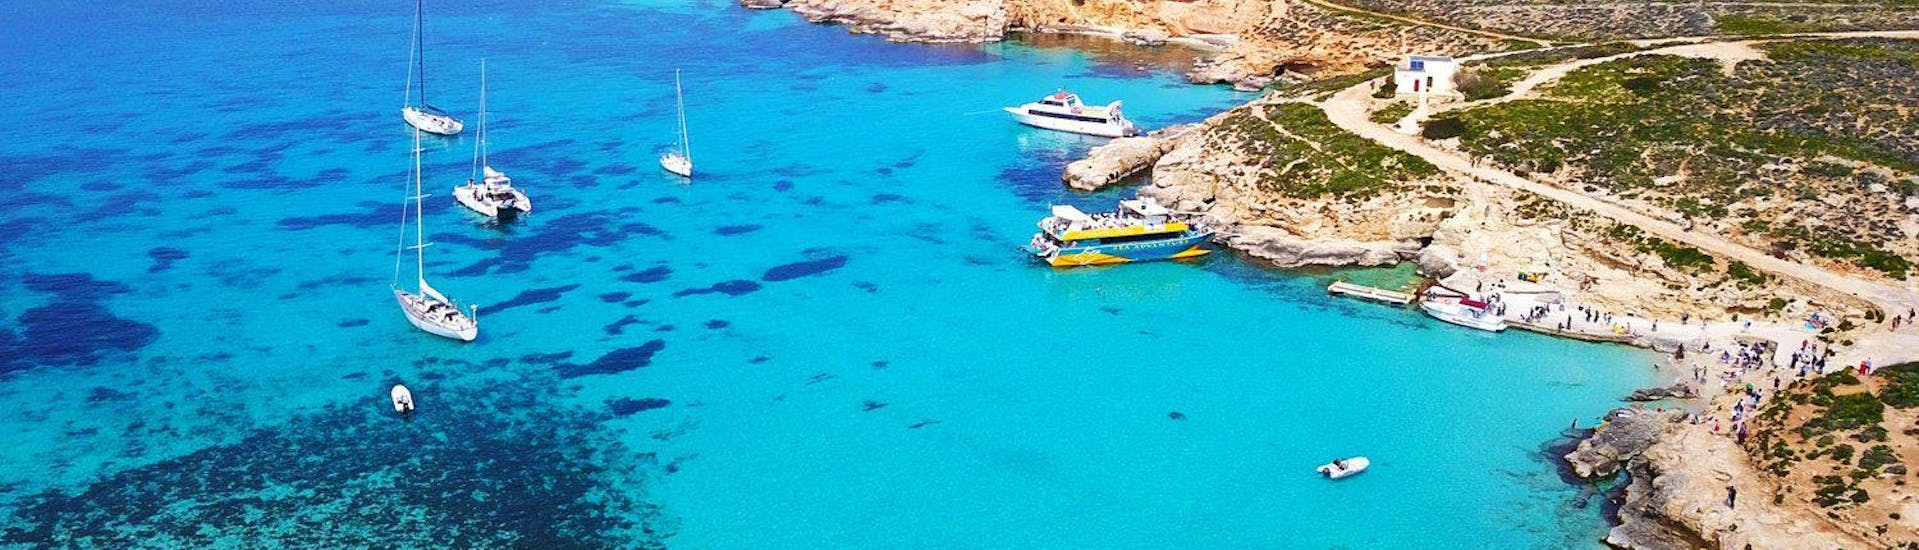 Holidaymakers are enjoying the view during their catamaran tour of the Blue Lagoon, Comino and Gozo organised by Sea Adventure Excursions.